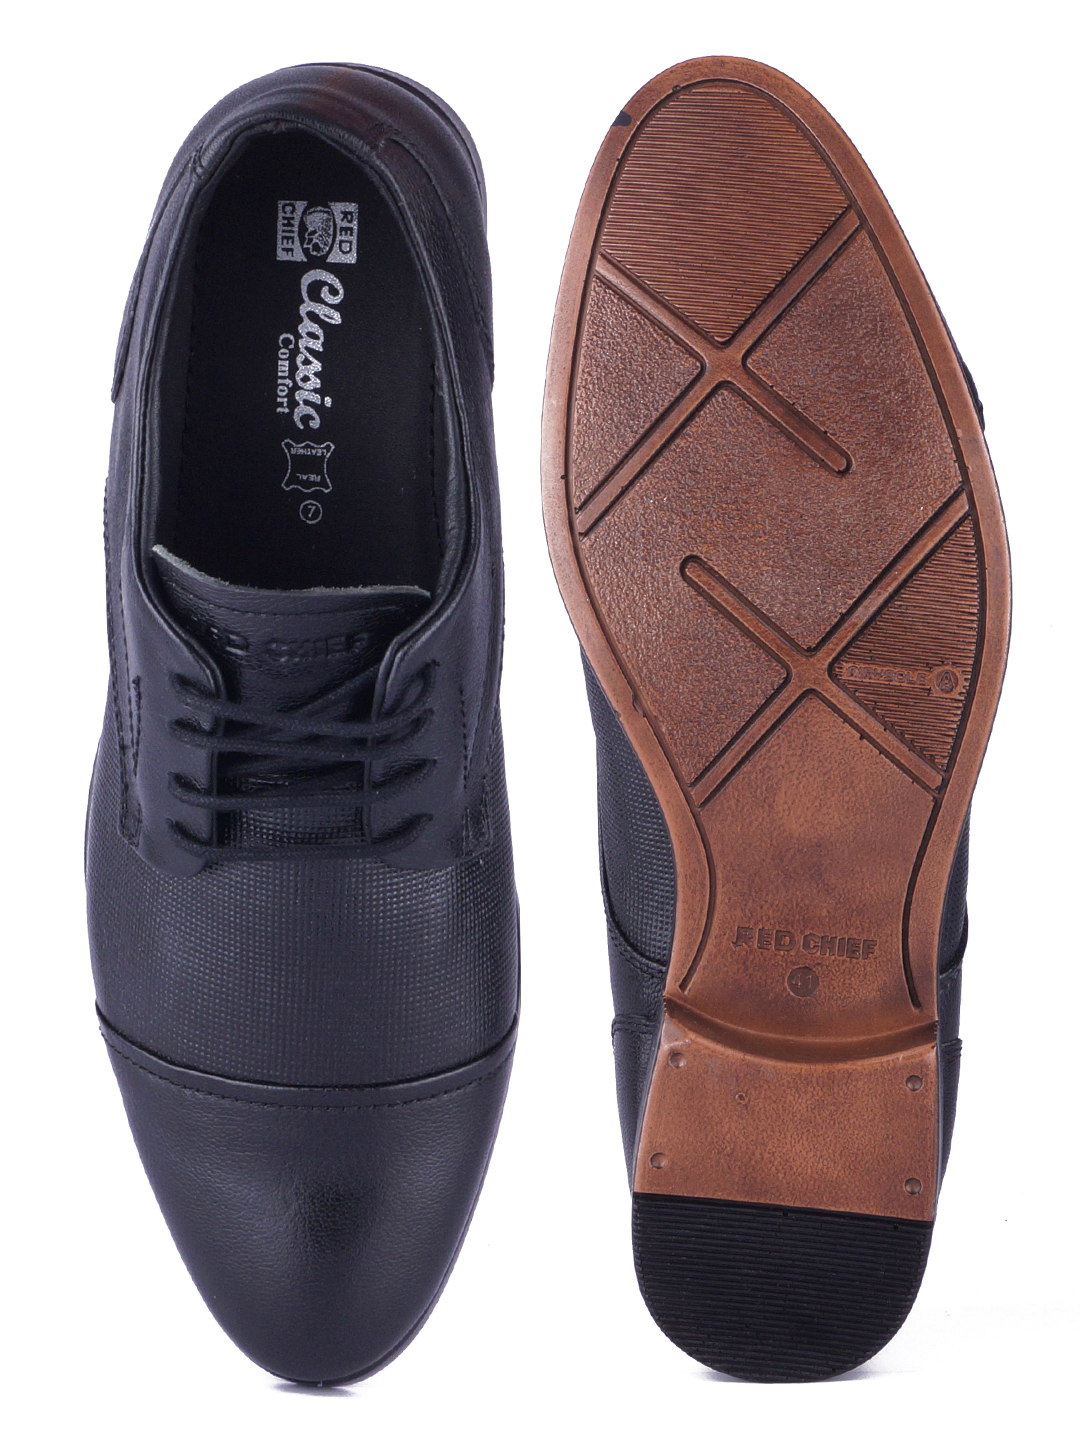 Redchief Black Formal Shoes For Men